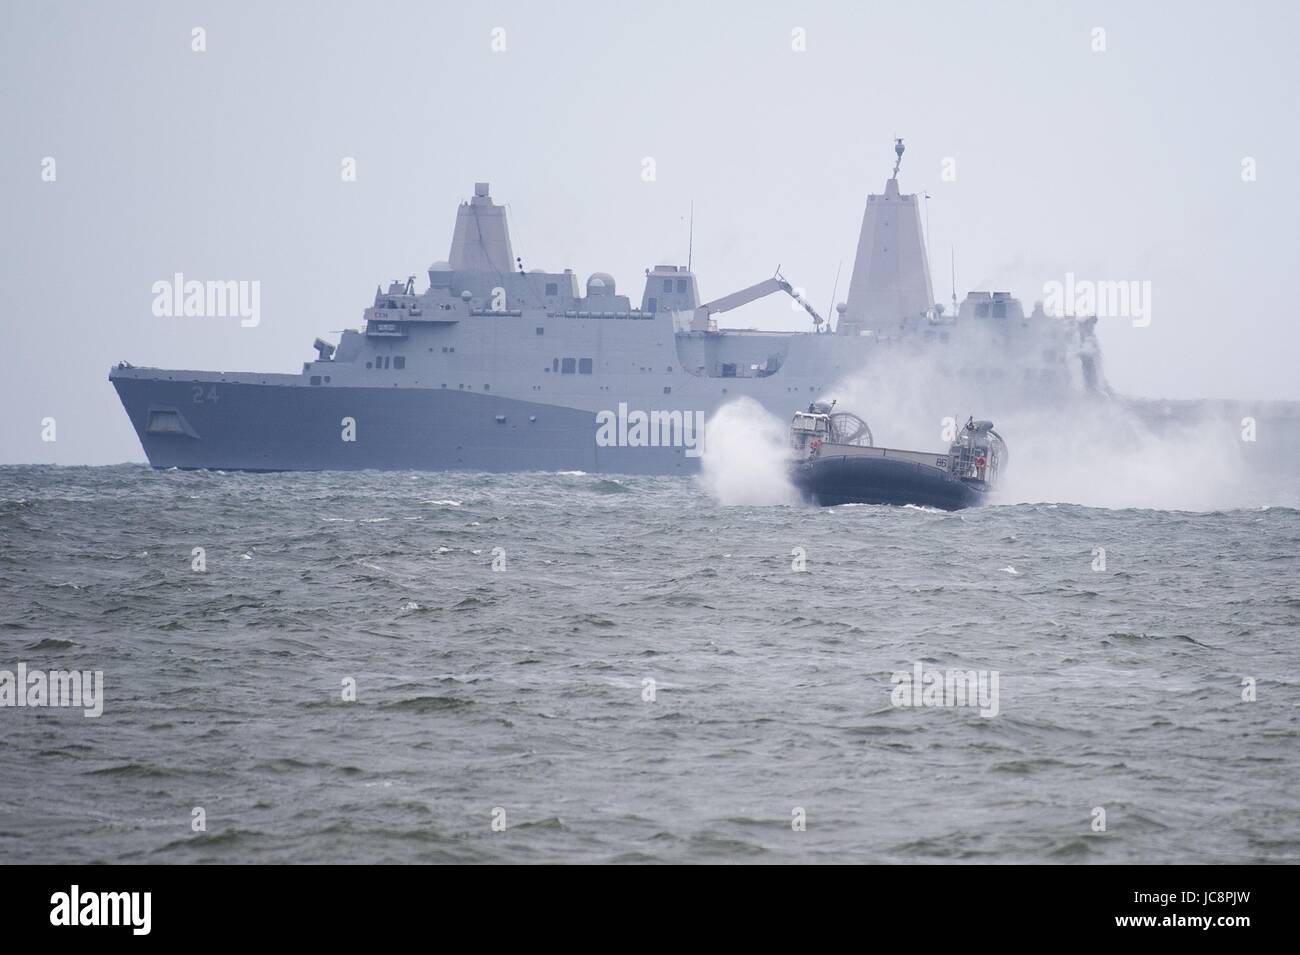 Ustka, Poland. 14th June, 2017. Poland is hosting 40 ships from 14 nations for this year’s edition of the international Baltic Sea exercise BALTOPS 17.  The annual maritime exercise take place on June 14, 2017 in Ustka, Poland. Credit: East News sp. z o.o./Alamy Live News Stock Photo